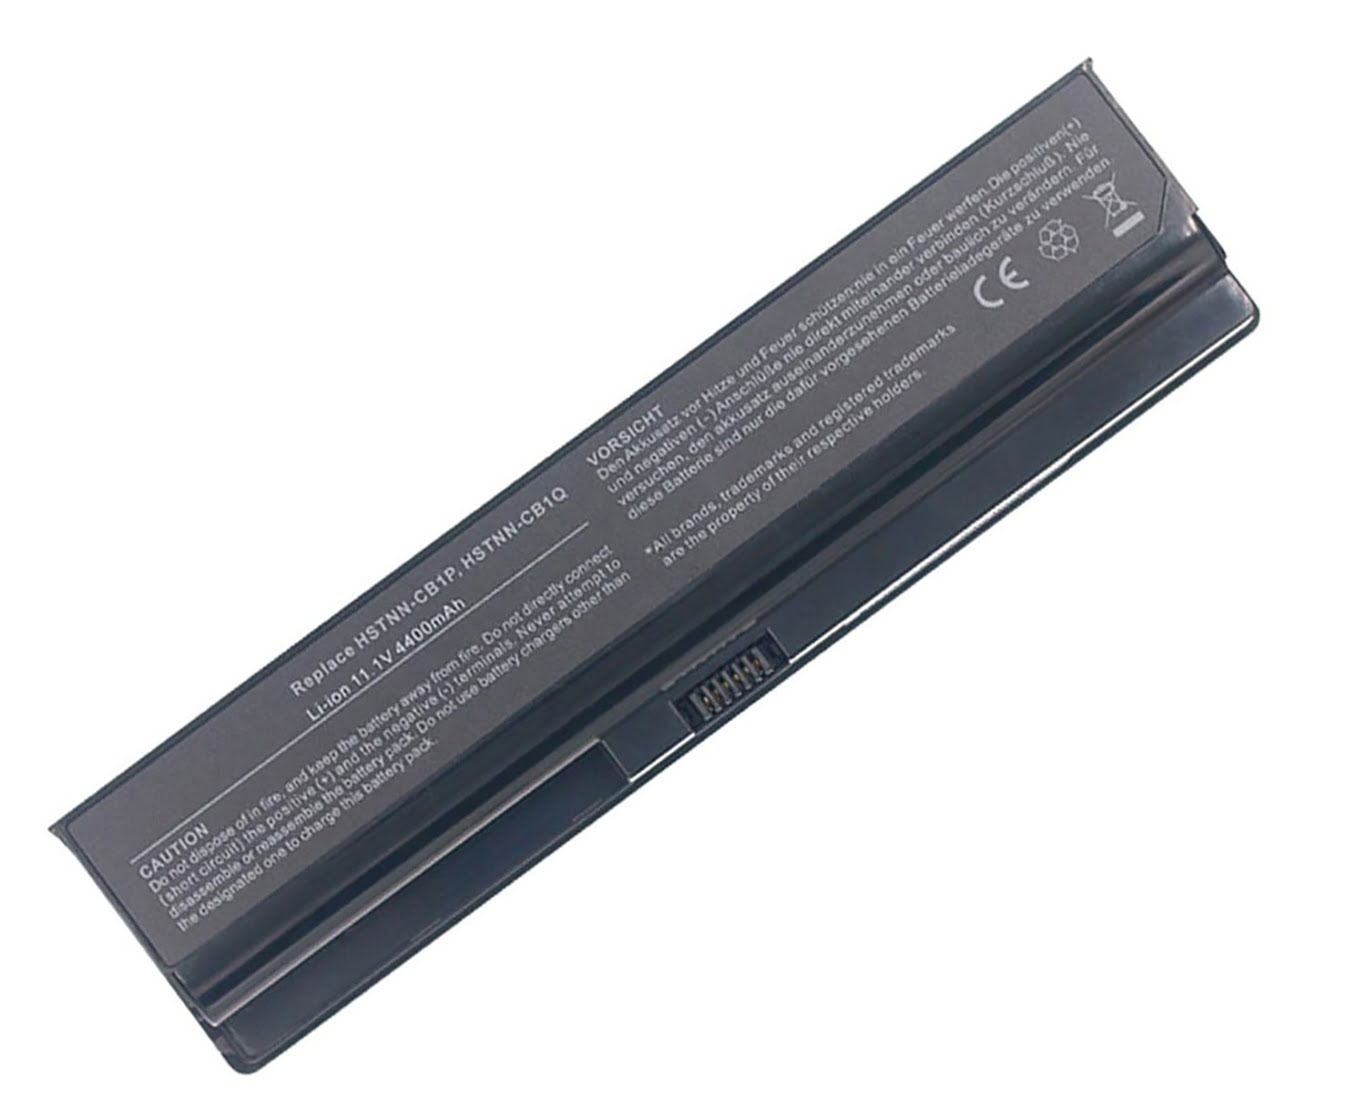 595669-541, 595669-721 replacement Laptop Battery for HP ProBook 5220m Series, 4400mAh, 6 cells, 11.1V